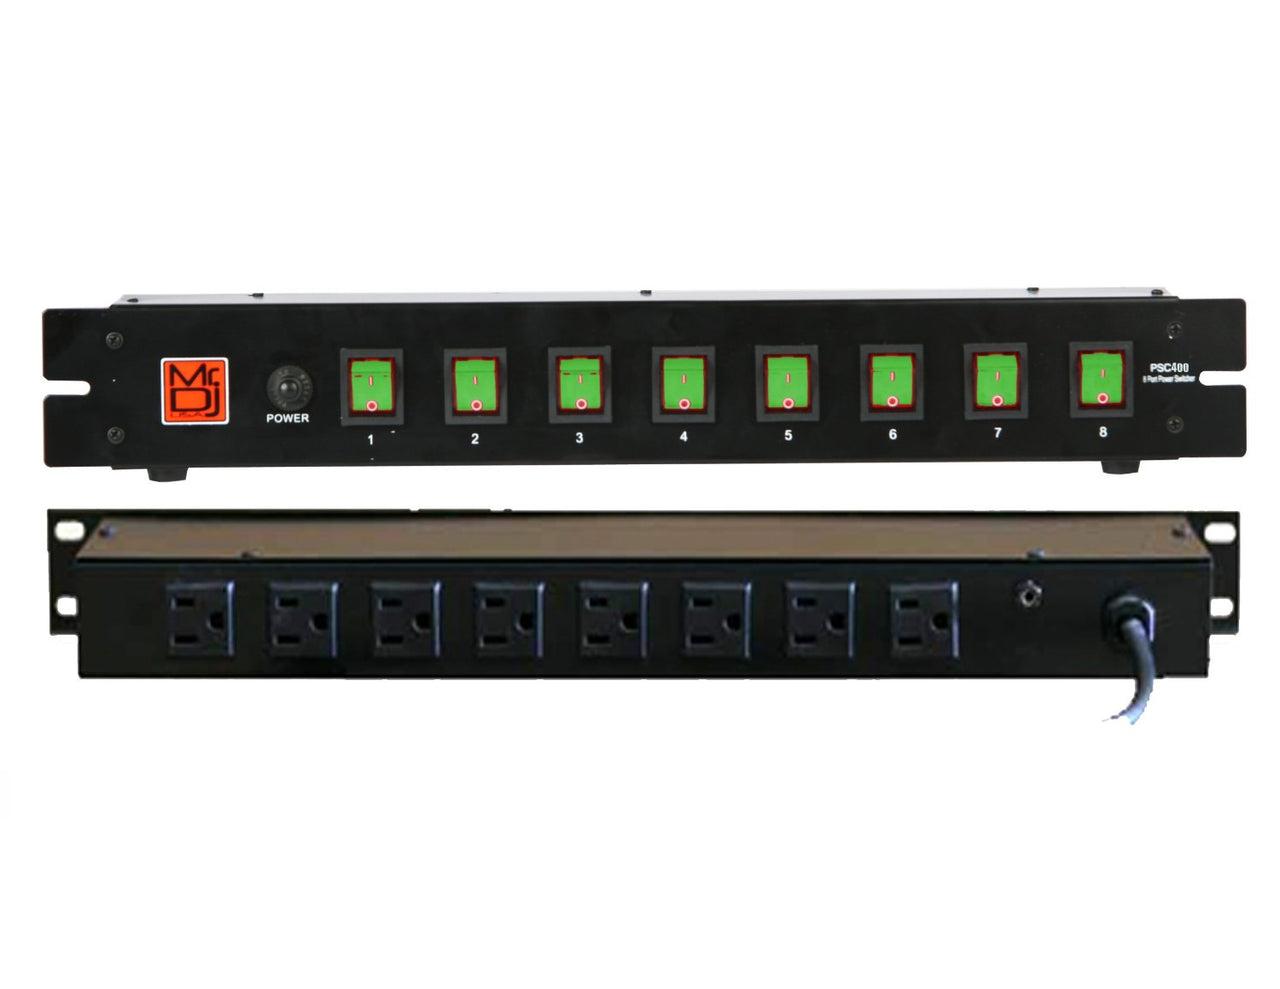 MR DJ PSC400 Power Switcher Surge Protectors <br/>Rack Mountable 8 Port Power Switcher Surge Protectors Green Toggles ON / OFF Power Center